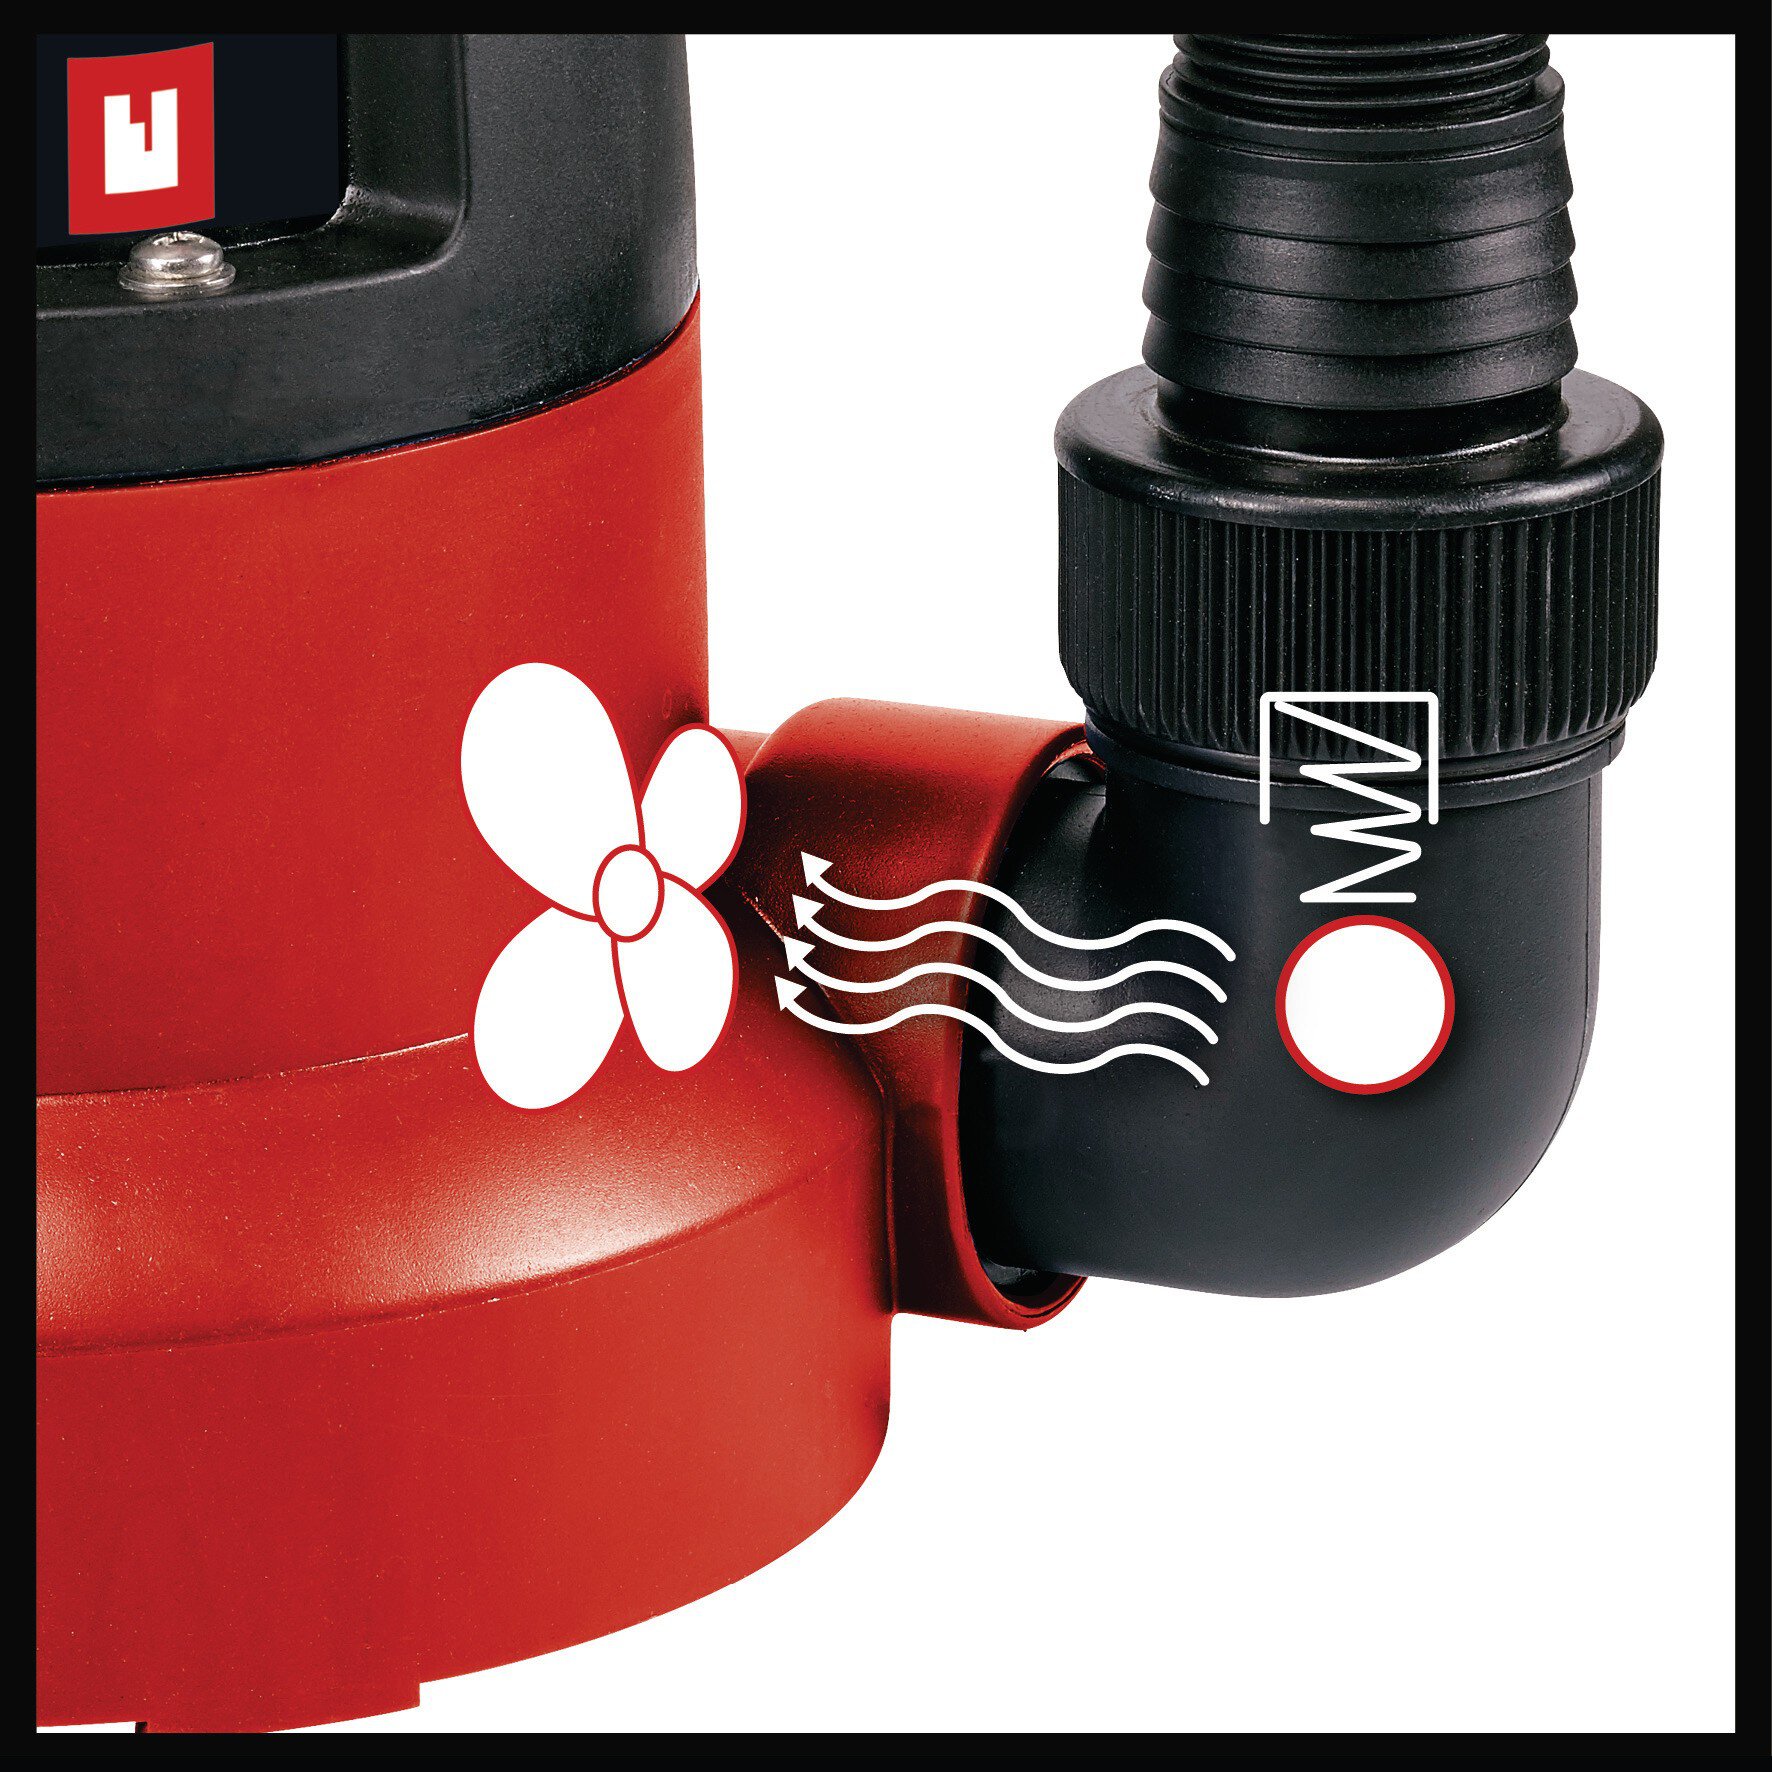 einhell-classic-submersible-pump-4170445-detail_image-004